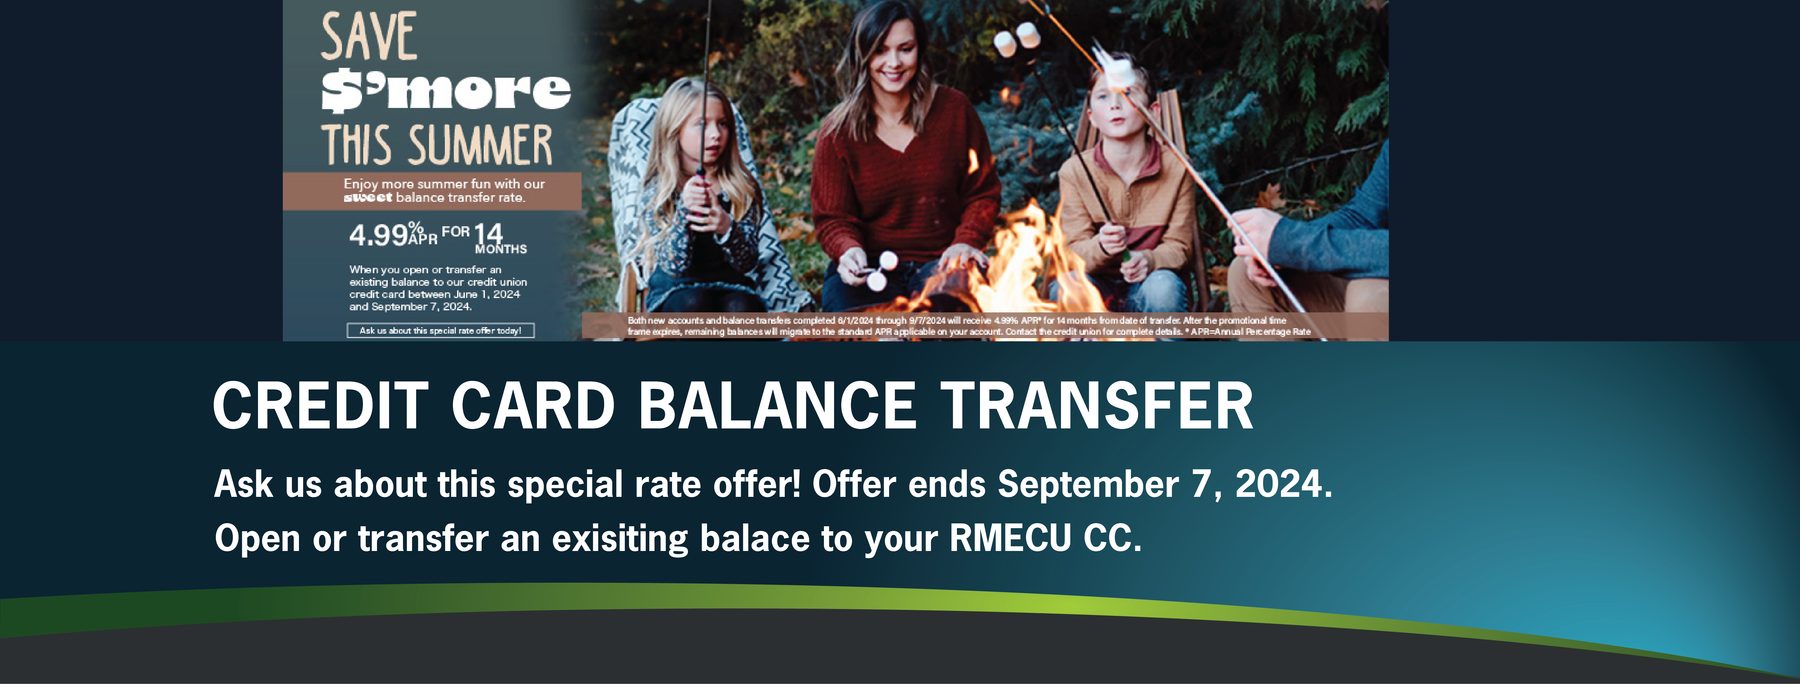 Special credit card balance transfer offer.